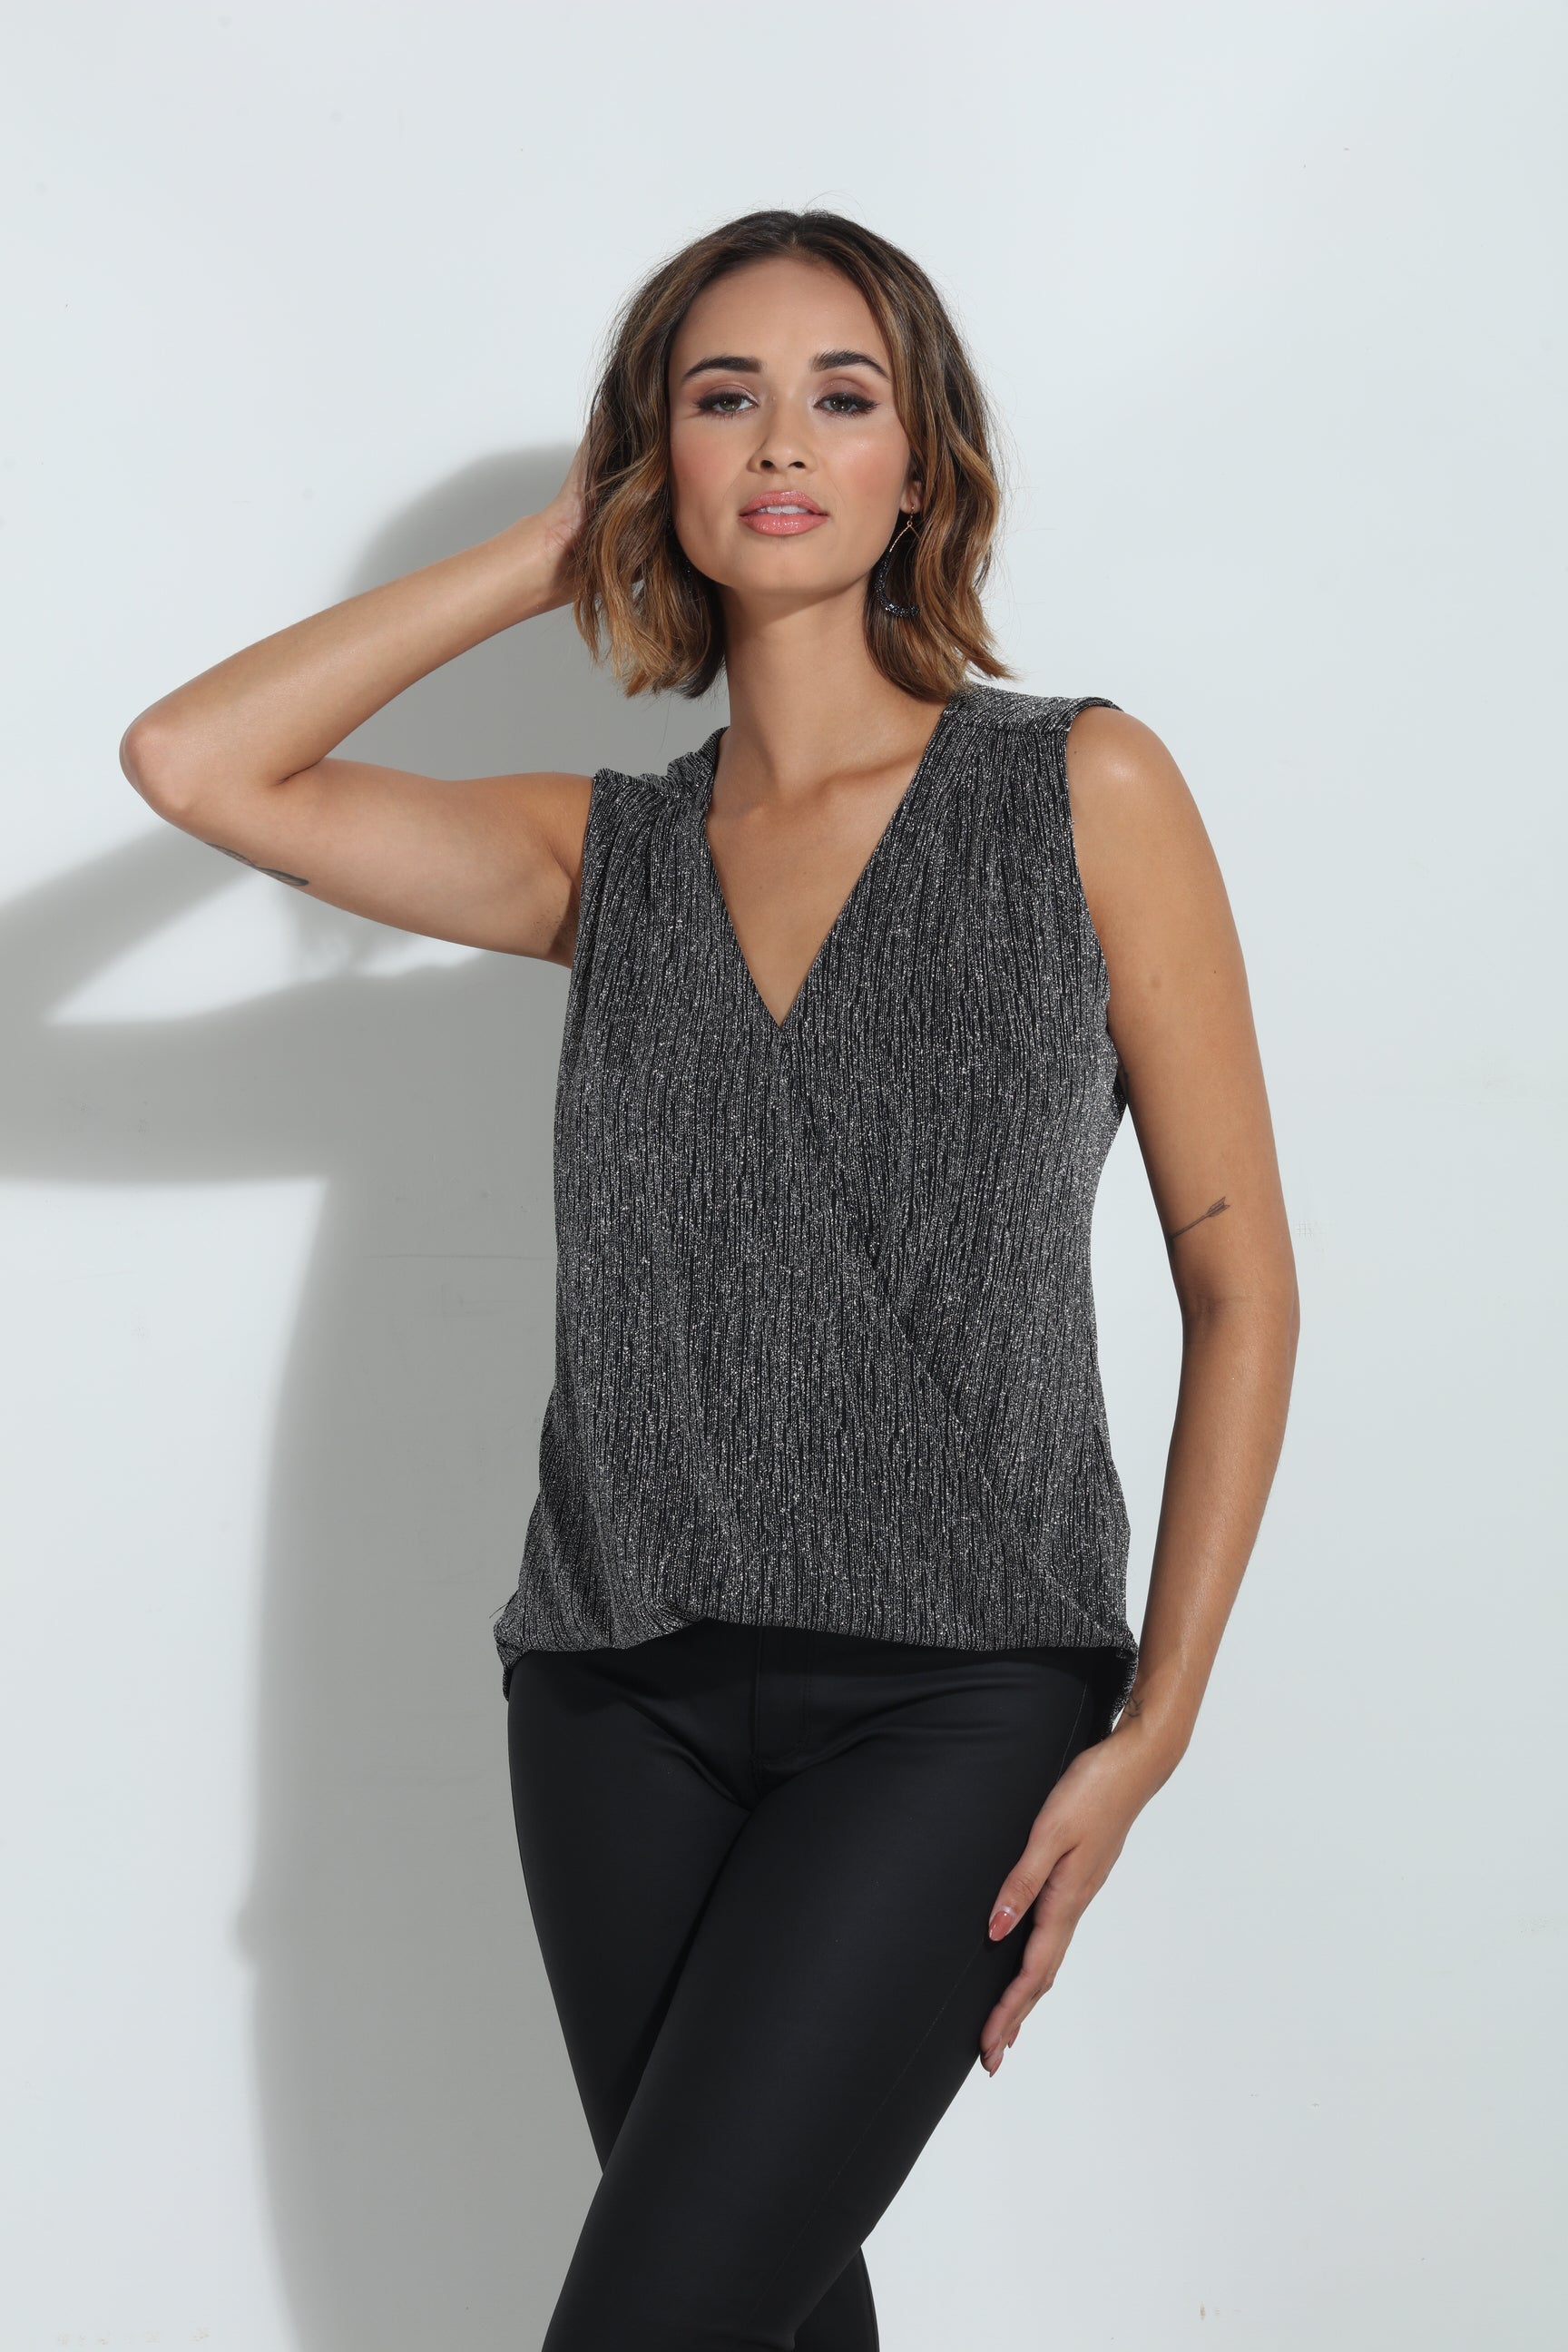 The Everyday Surplice Tank-Black & Silver Sparkle -BEST SELLER by